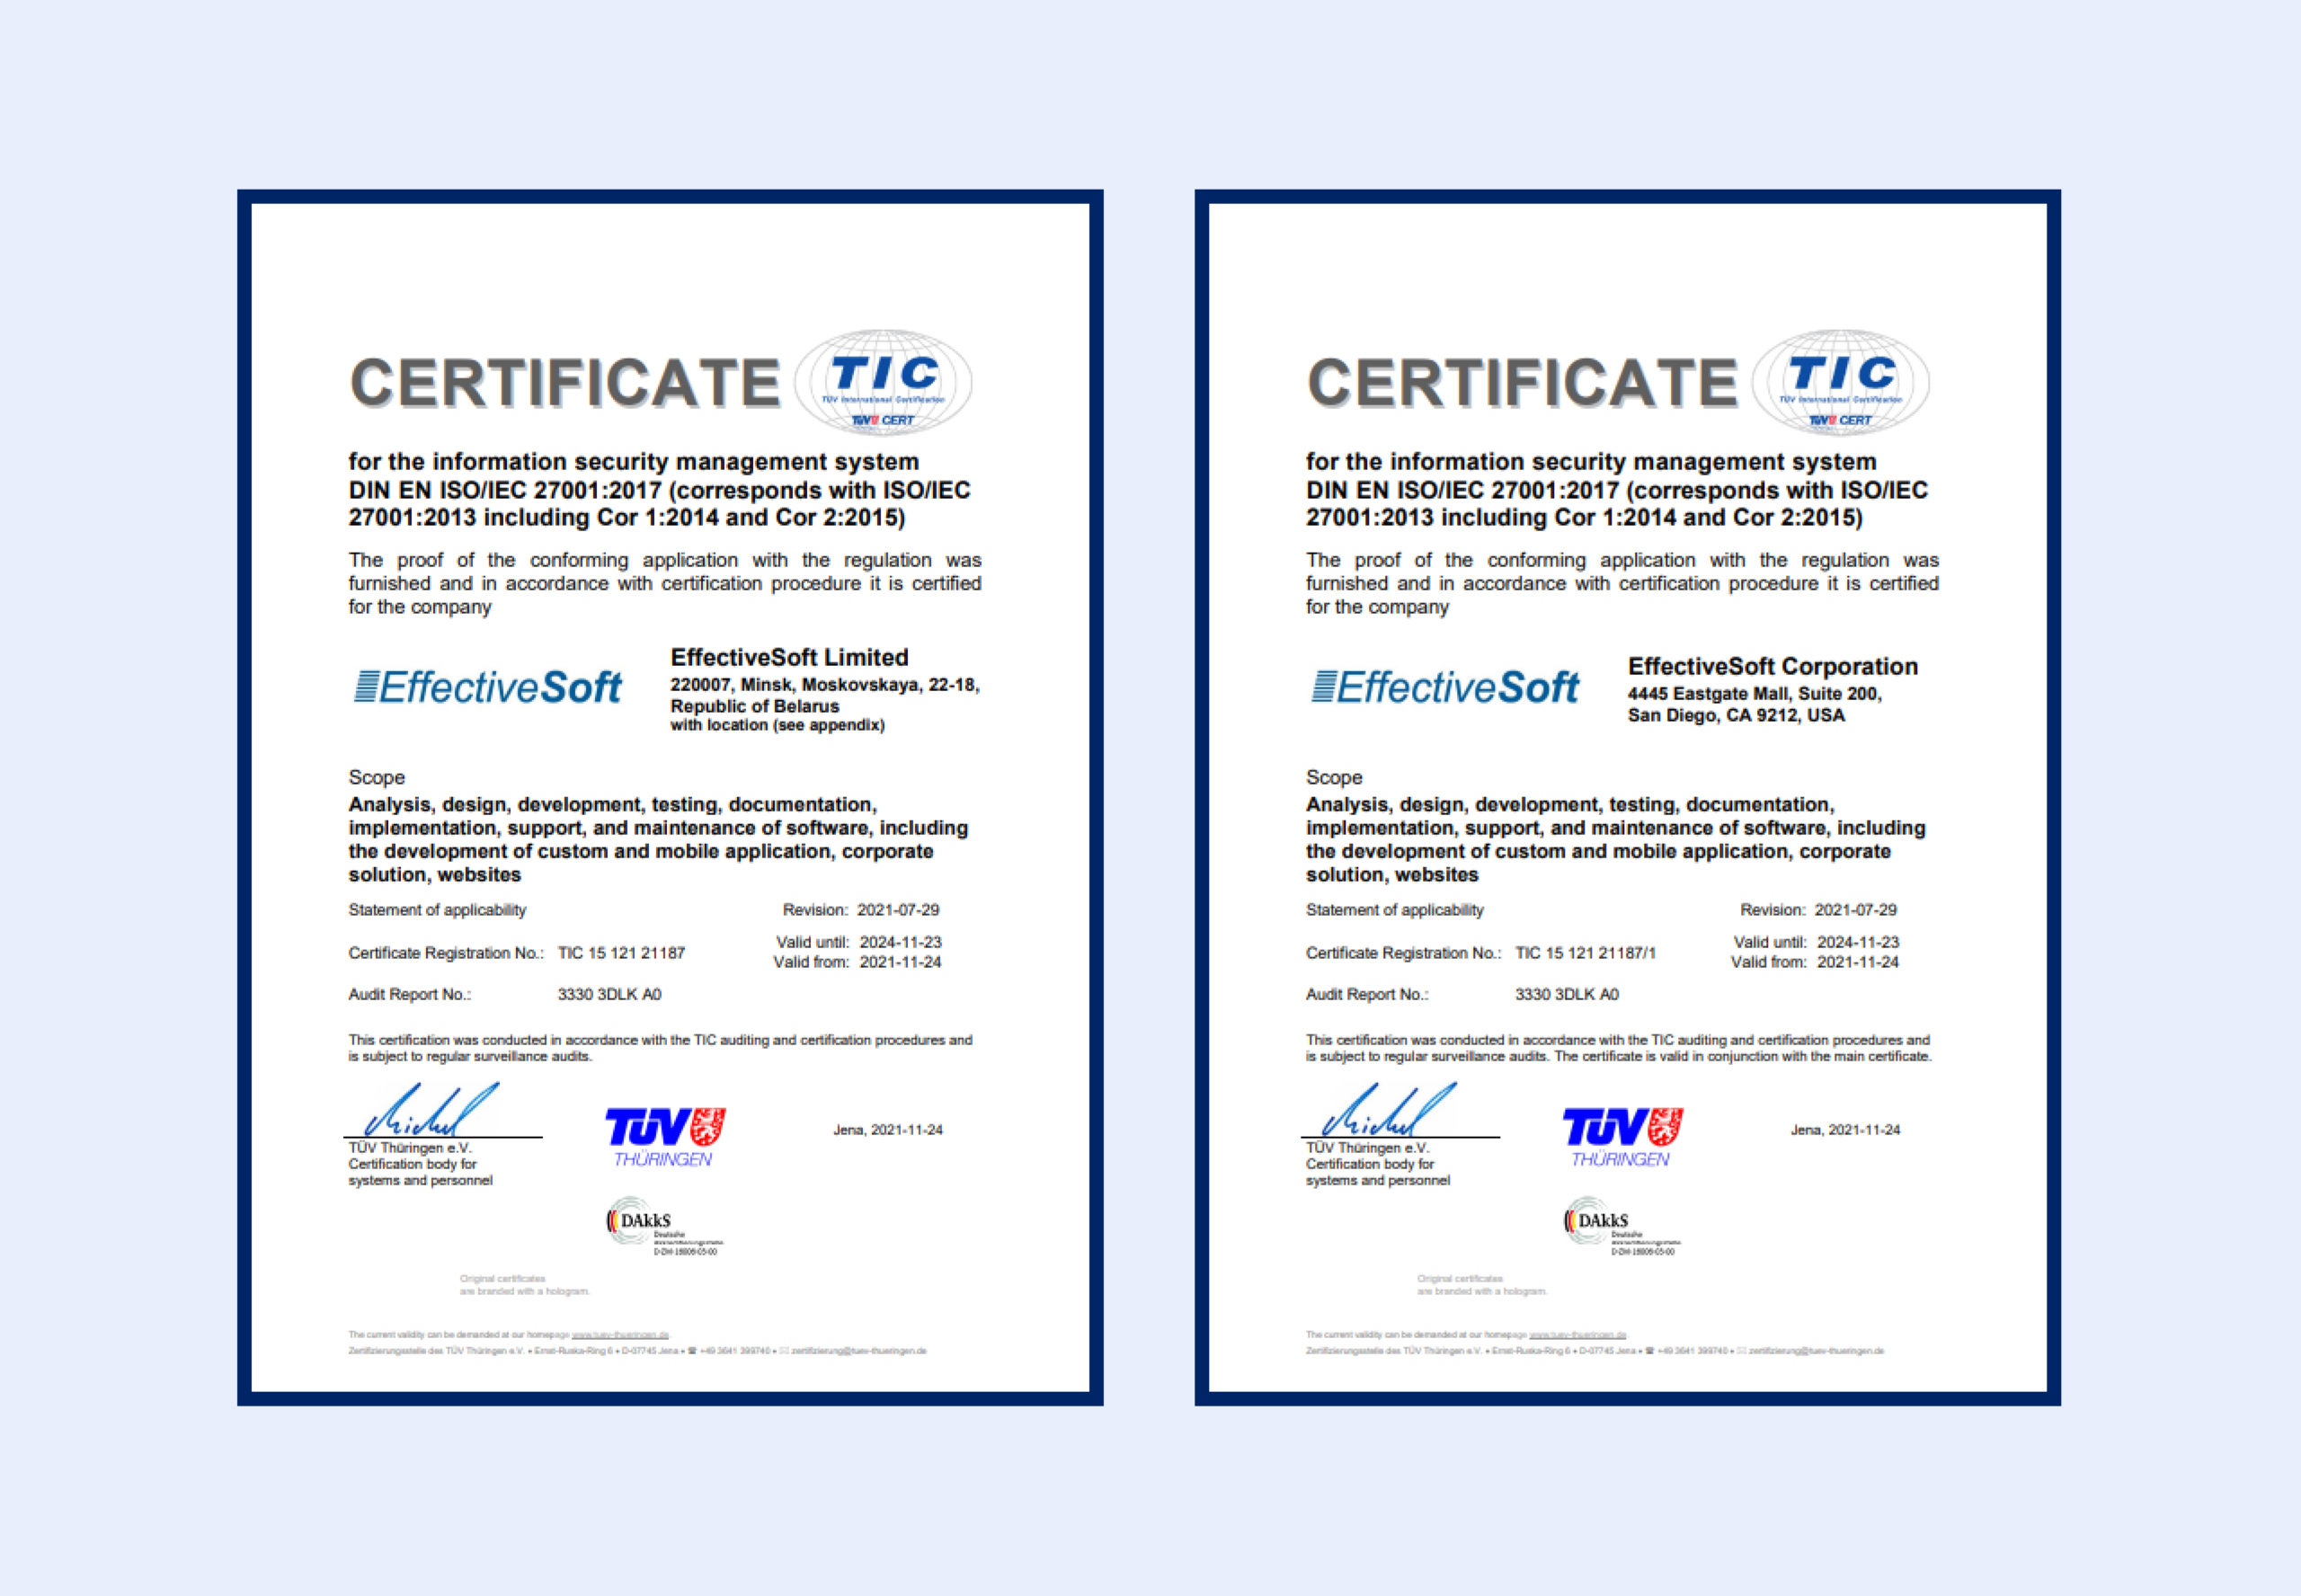 EffectiveSoft Receives ISO / IEC 27001: 2013 Certification